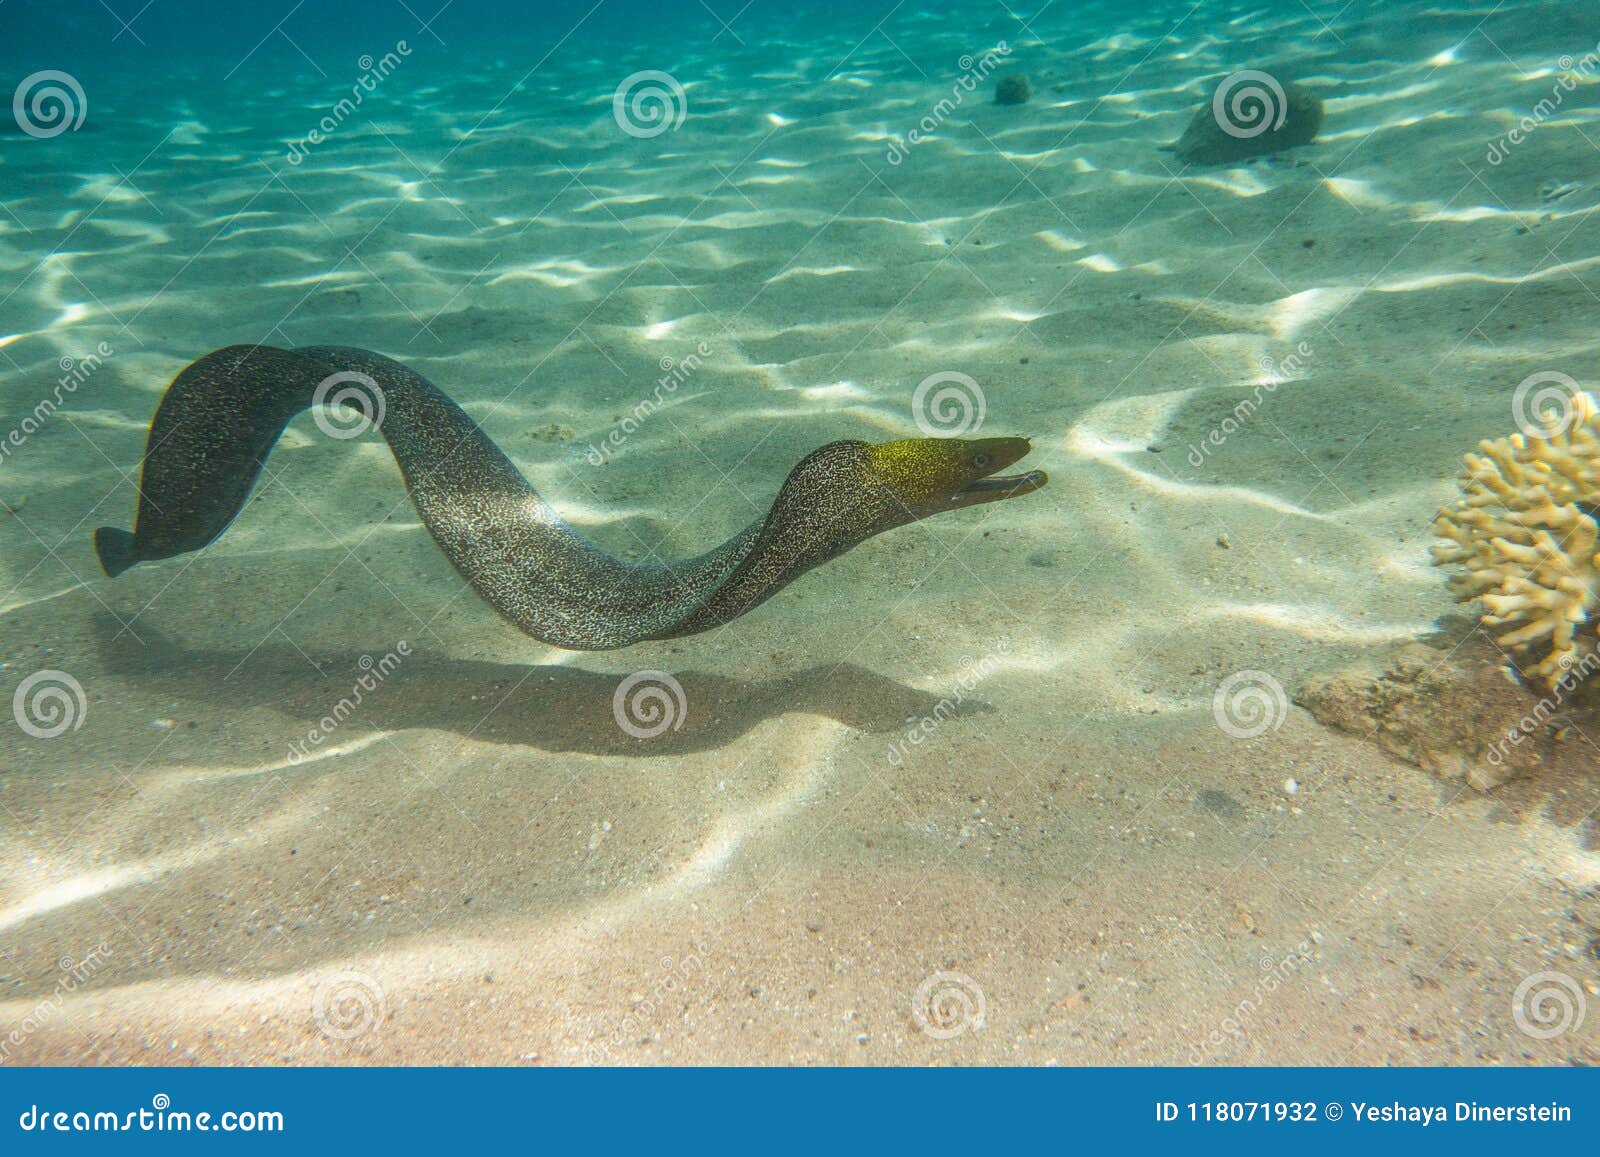 moray eel in the red sea, eilat israel a.e